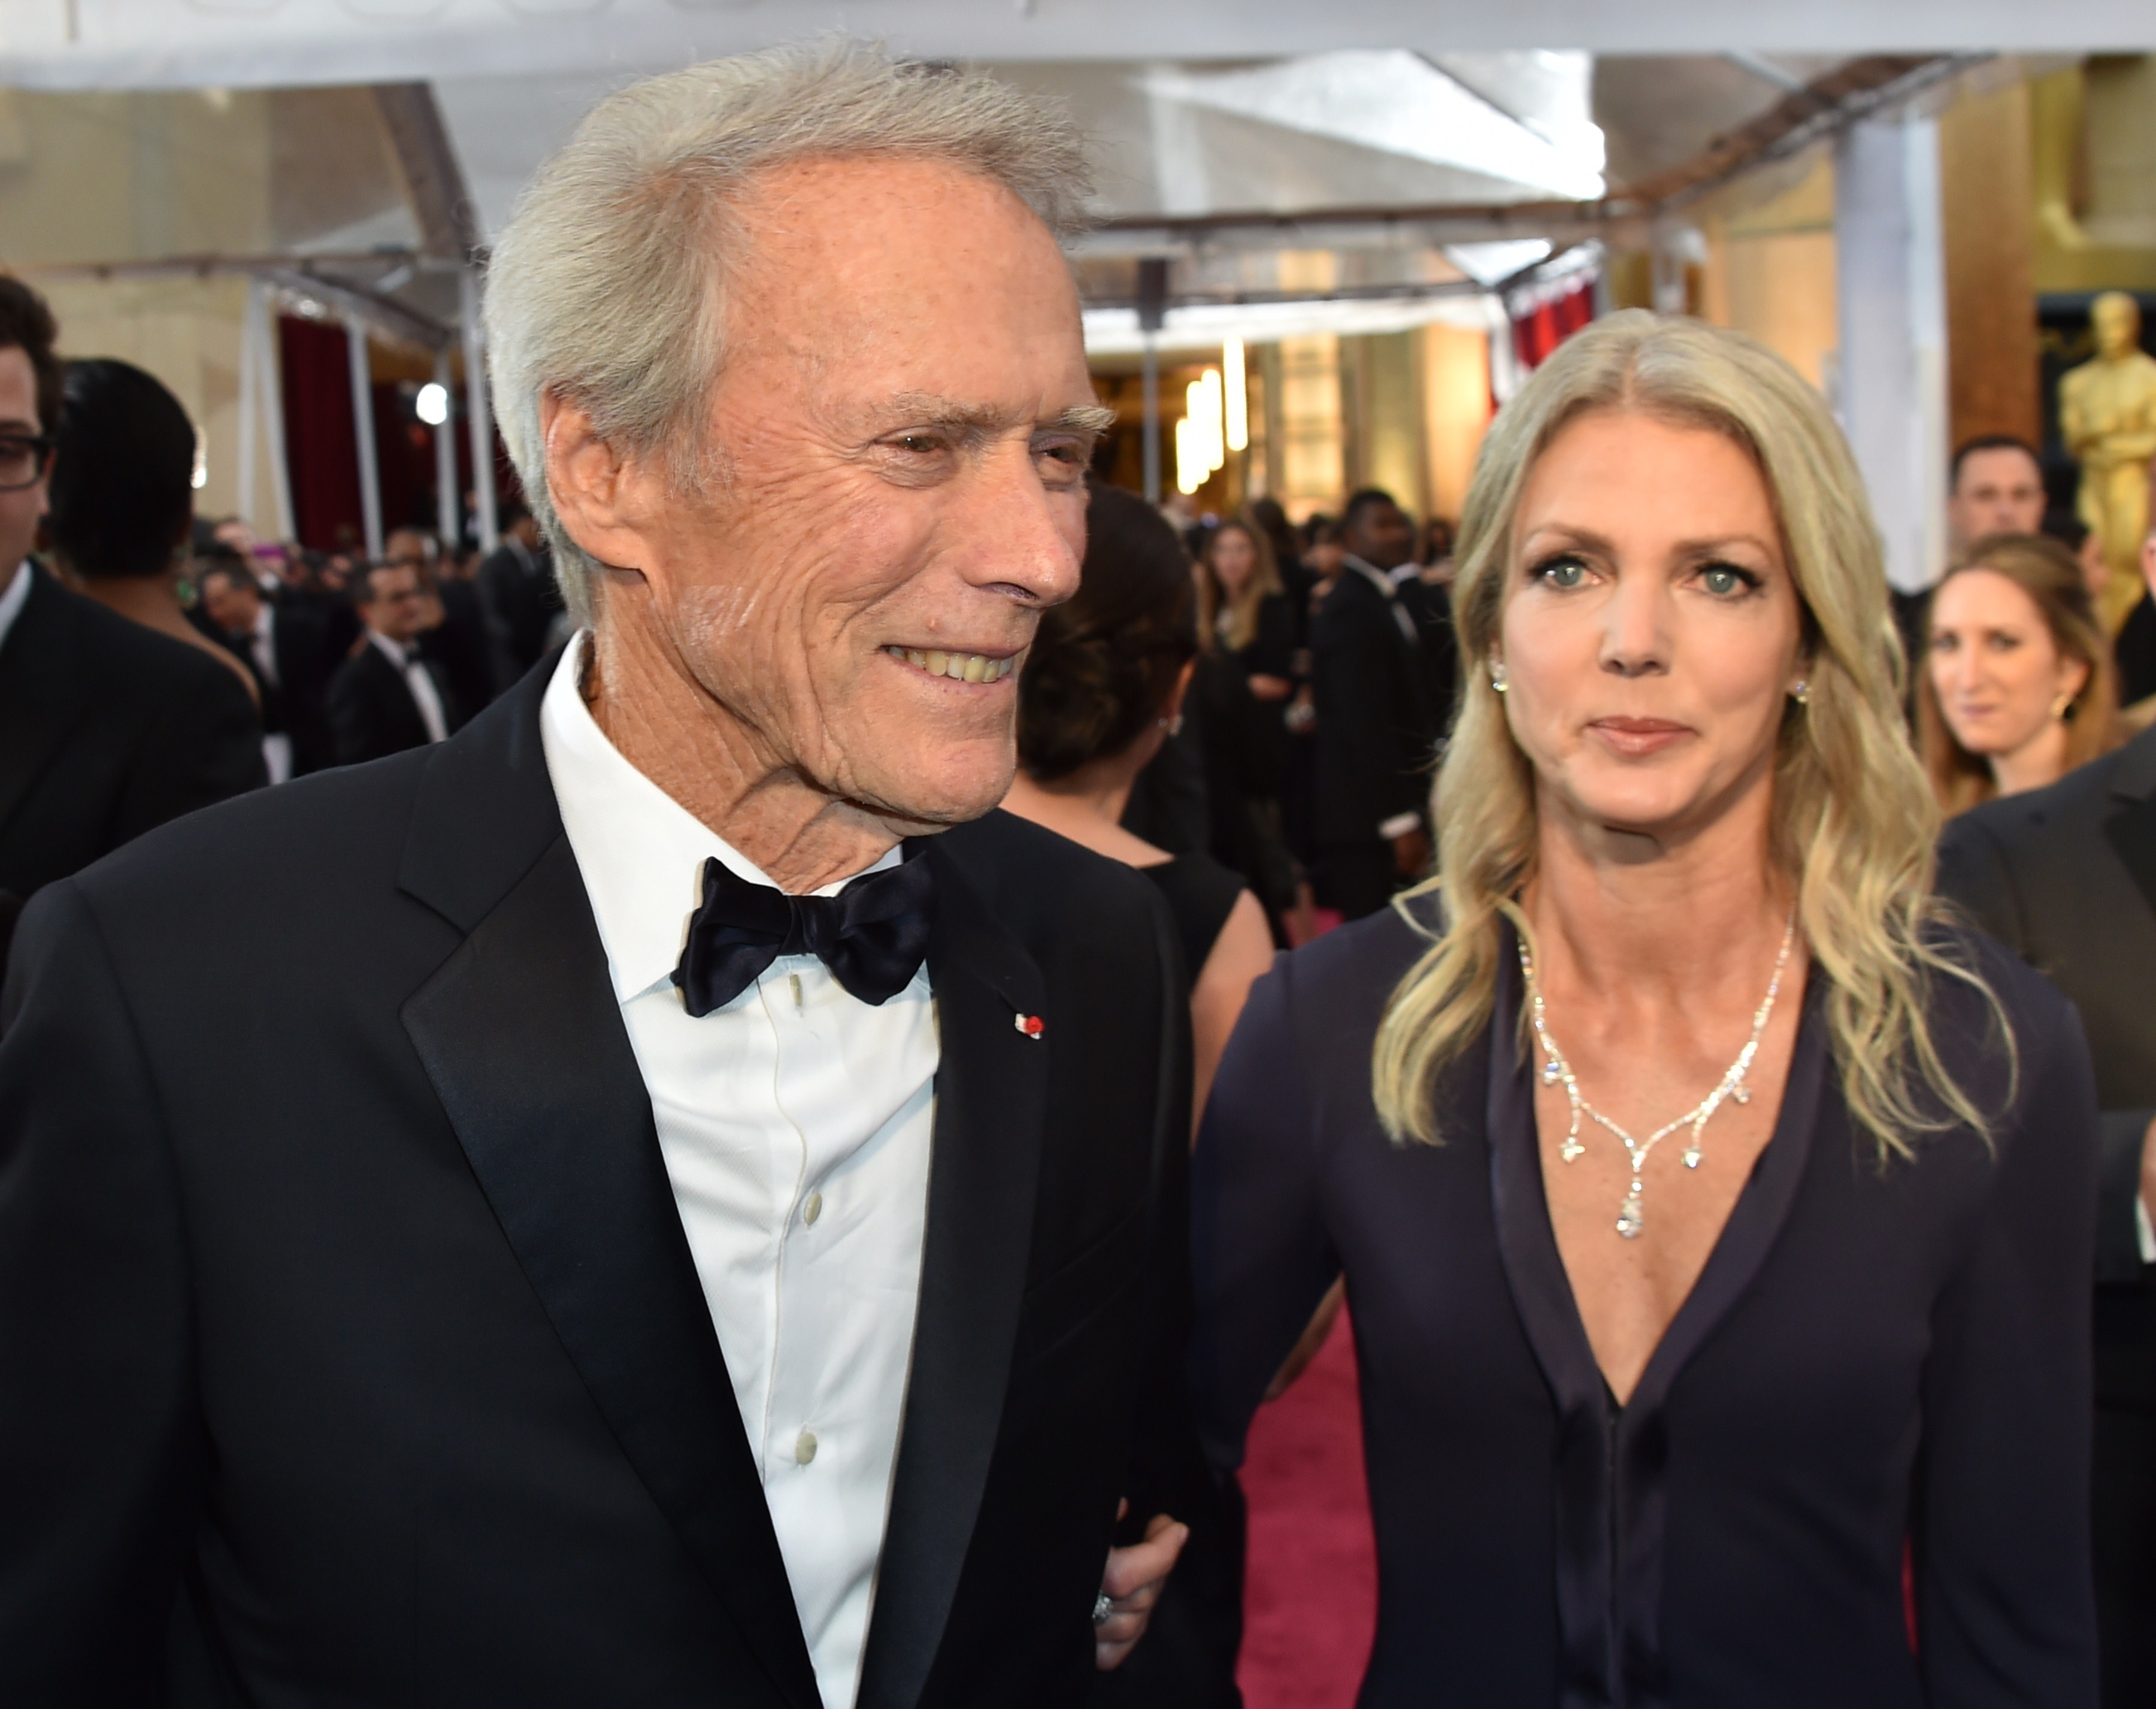 Clint Eastwood and Christina Sandera arrive on the red carpet for the 87th Oscars in Hollywood, California, on February 22, 2015. | Source: Getty Images